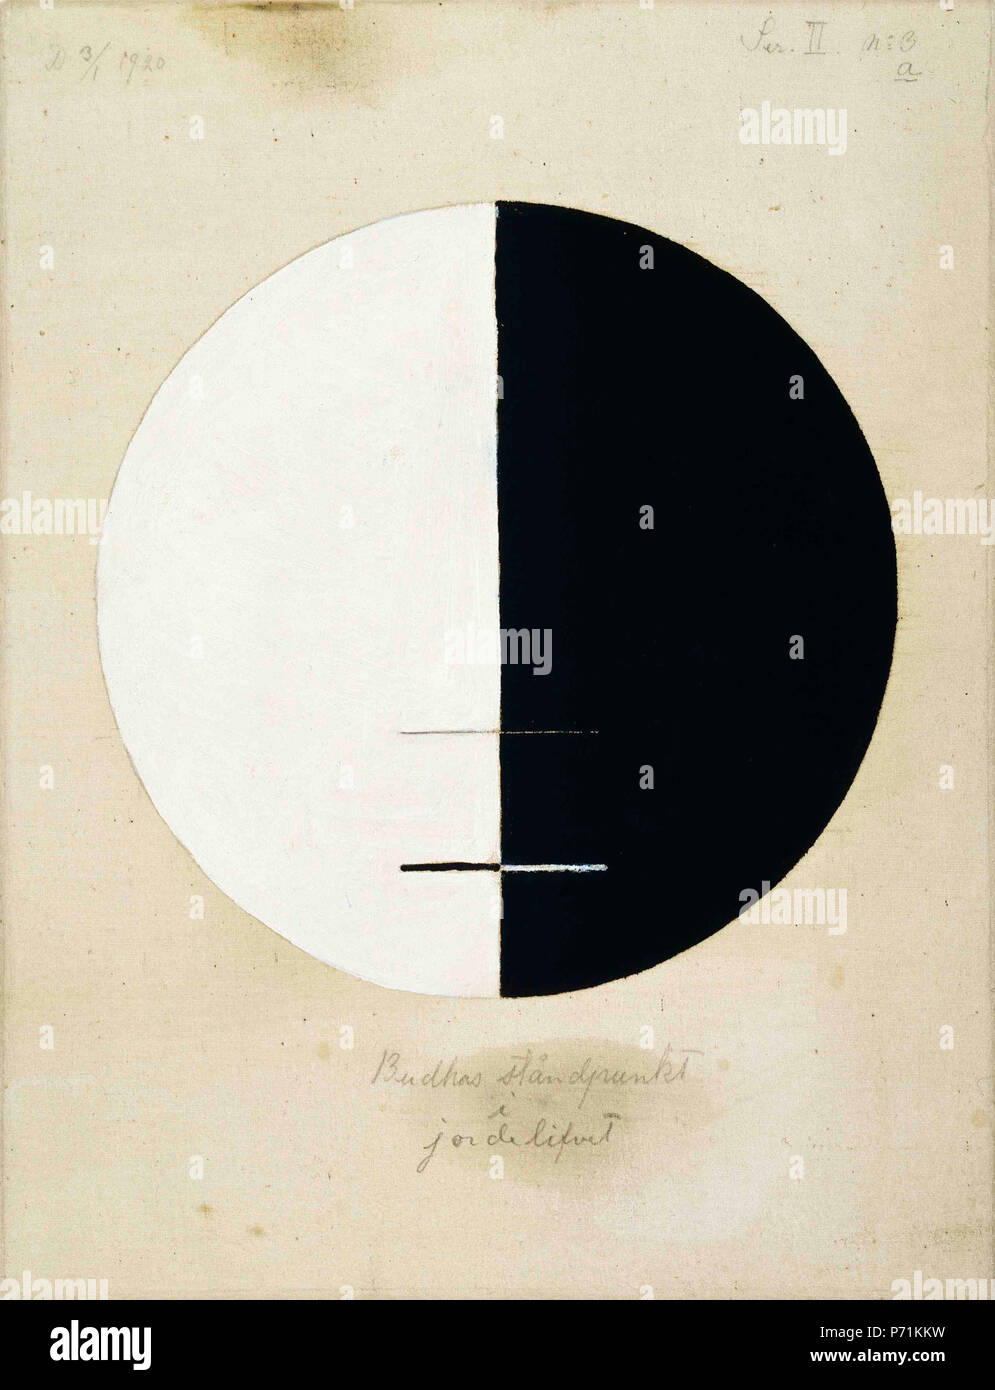 Hilma af Klint, Buddha’s Standpoint in the Earthly Life, No. 3a, (1920), courtesy Hamburger Bahnhof . 1920 19 Hilma af Klint - 1920 - Buddha's Standpoint in the Earthly Life - No 3a Stock Photo